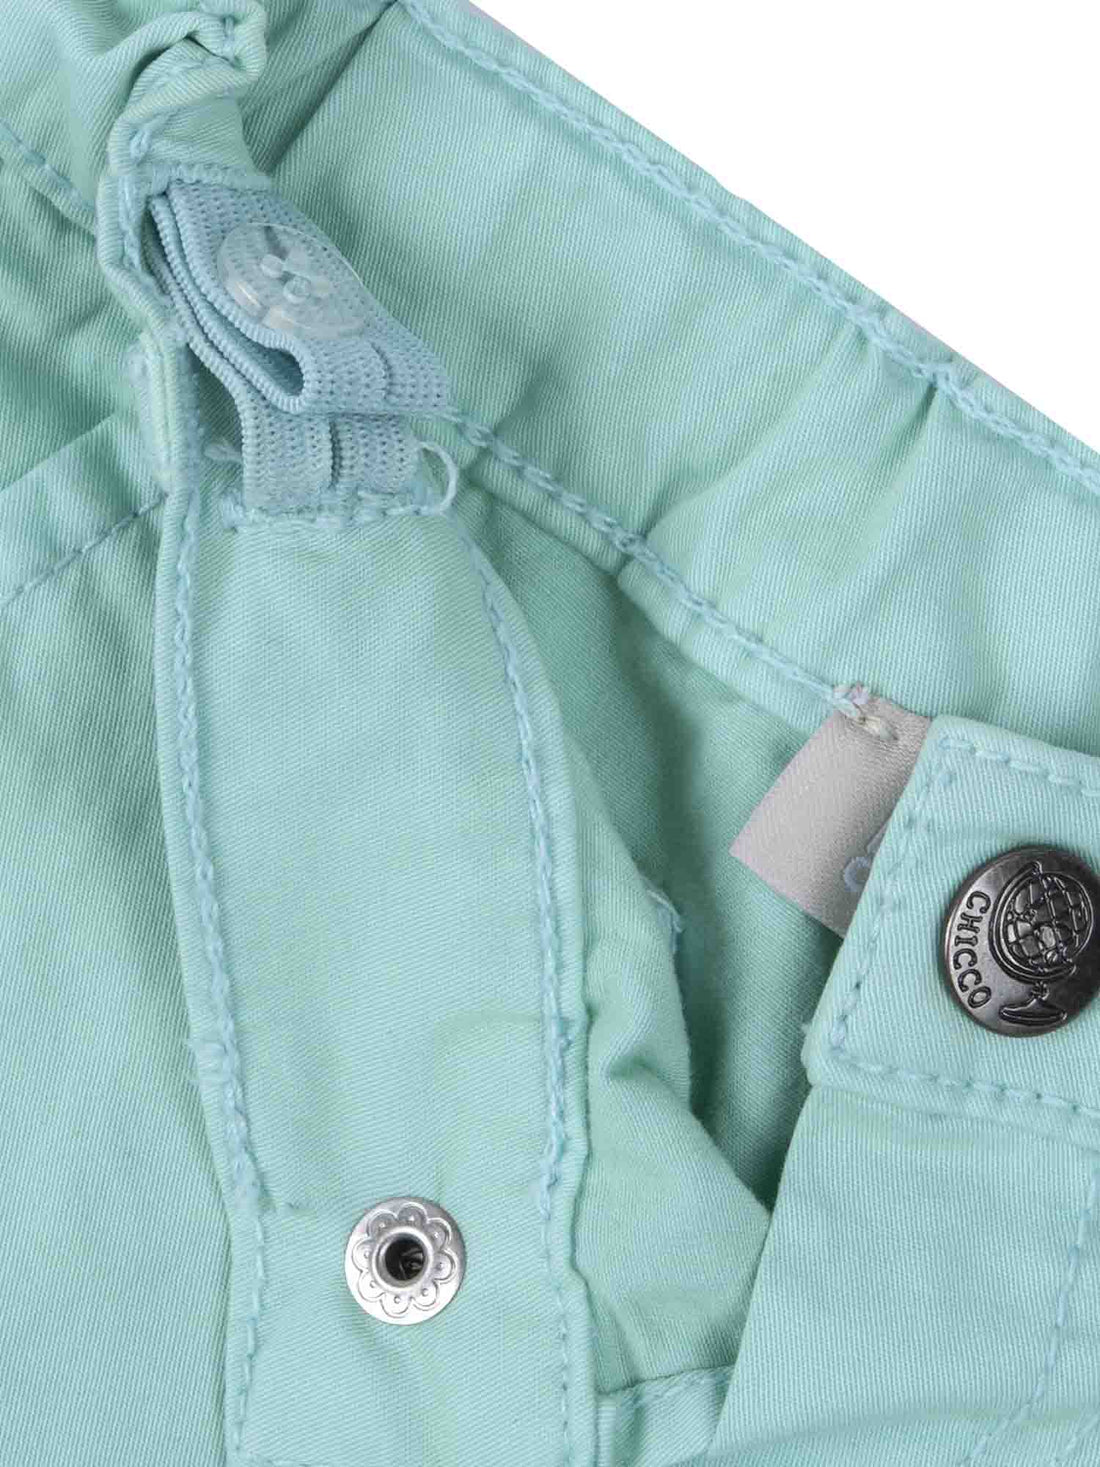 Shorts Verde Chicco